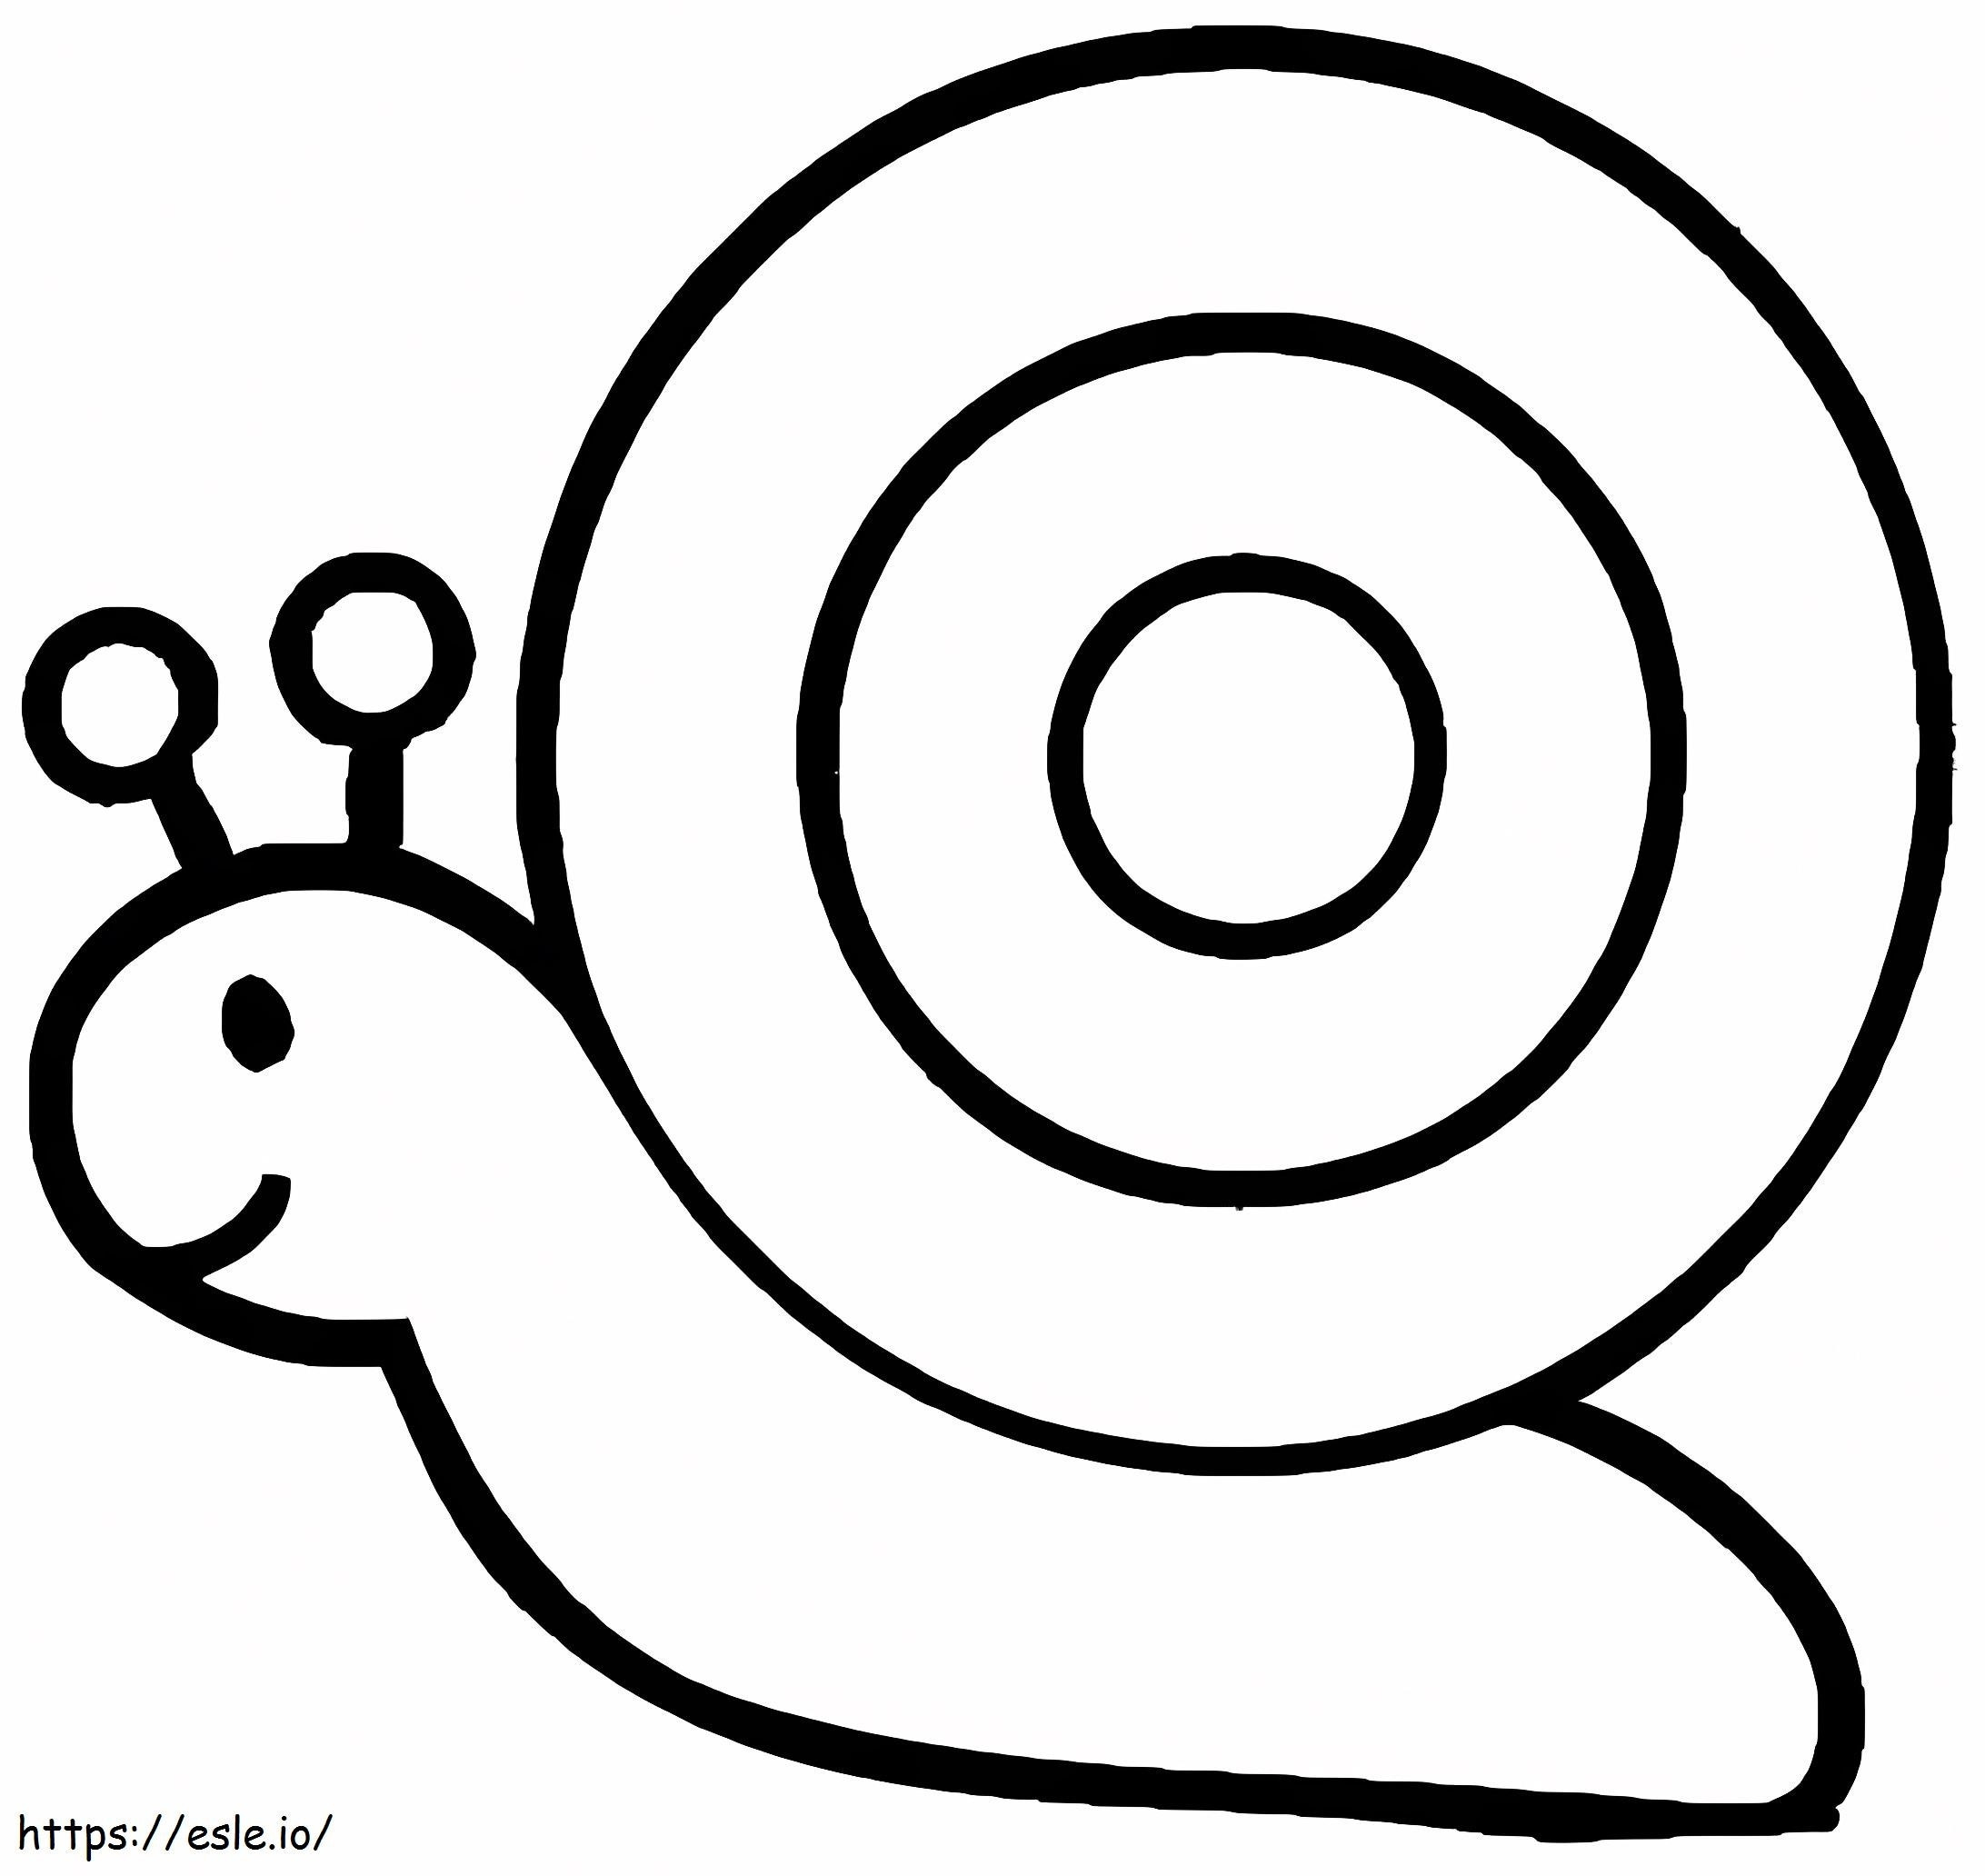 Snail Drawing coloring page